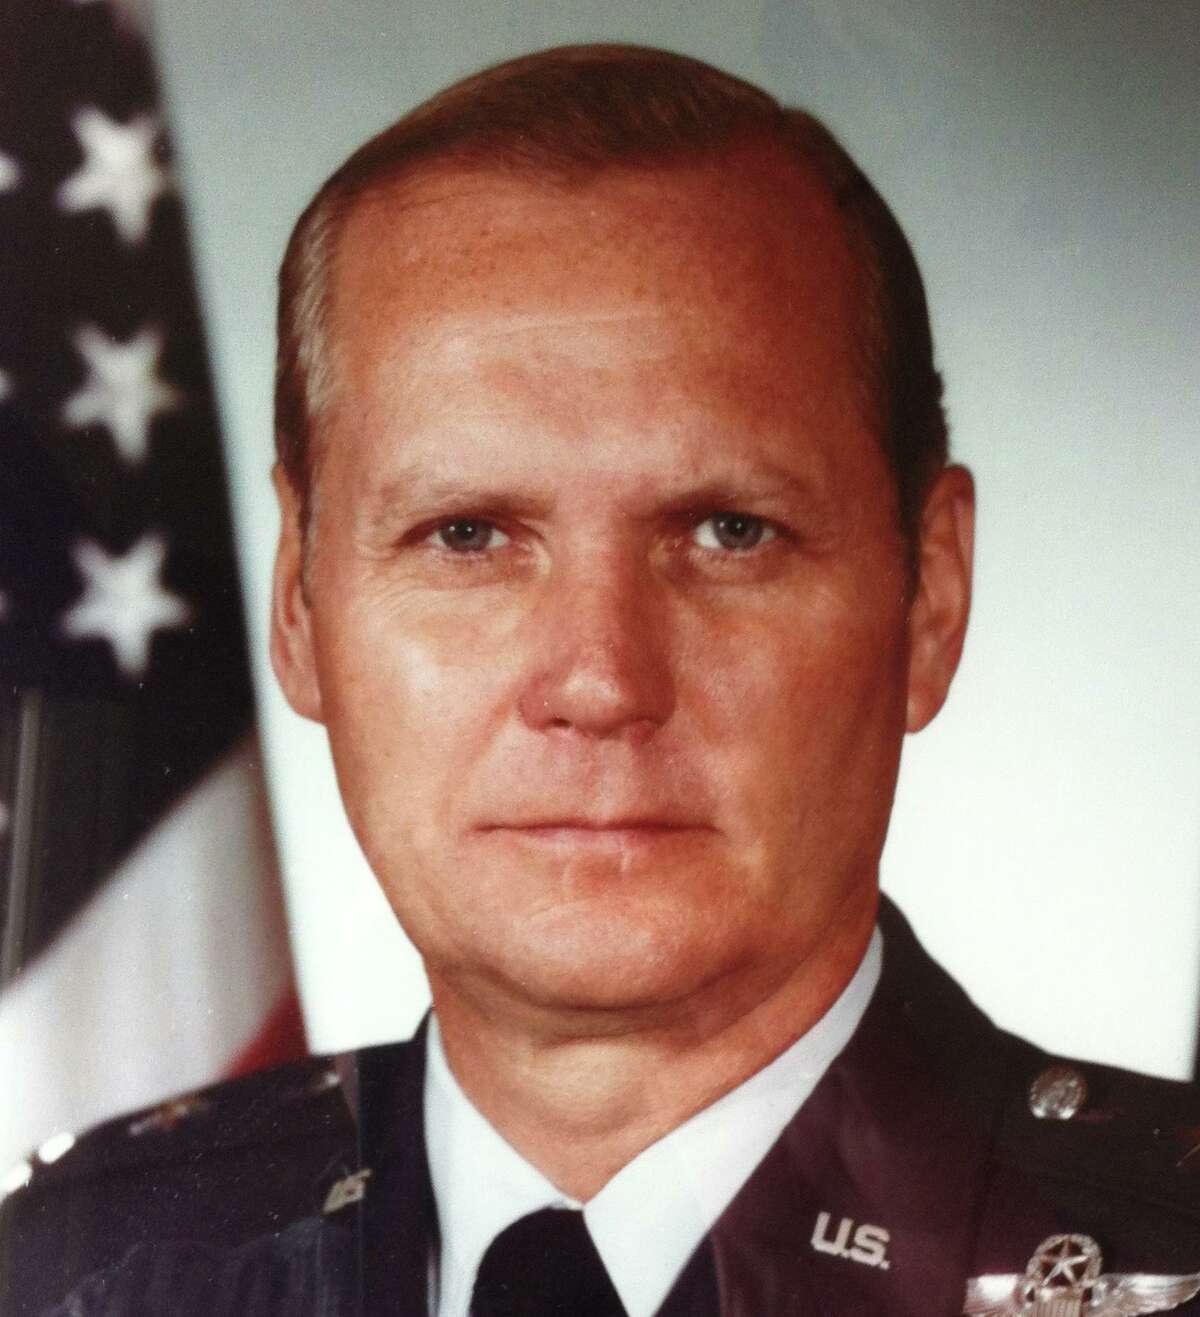 Leroy William Svendsen was a legend in the world of Air Force Special Operations.  In Vietnam, he led a classified commando operation and flew more than 100 missions in support of Army Special Forces.  He became a two-star general.  Svendsen died on February 14 at age 93.